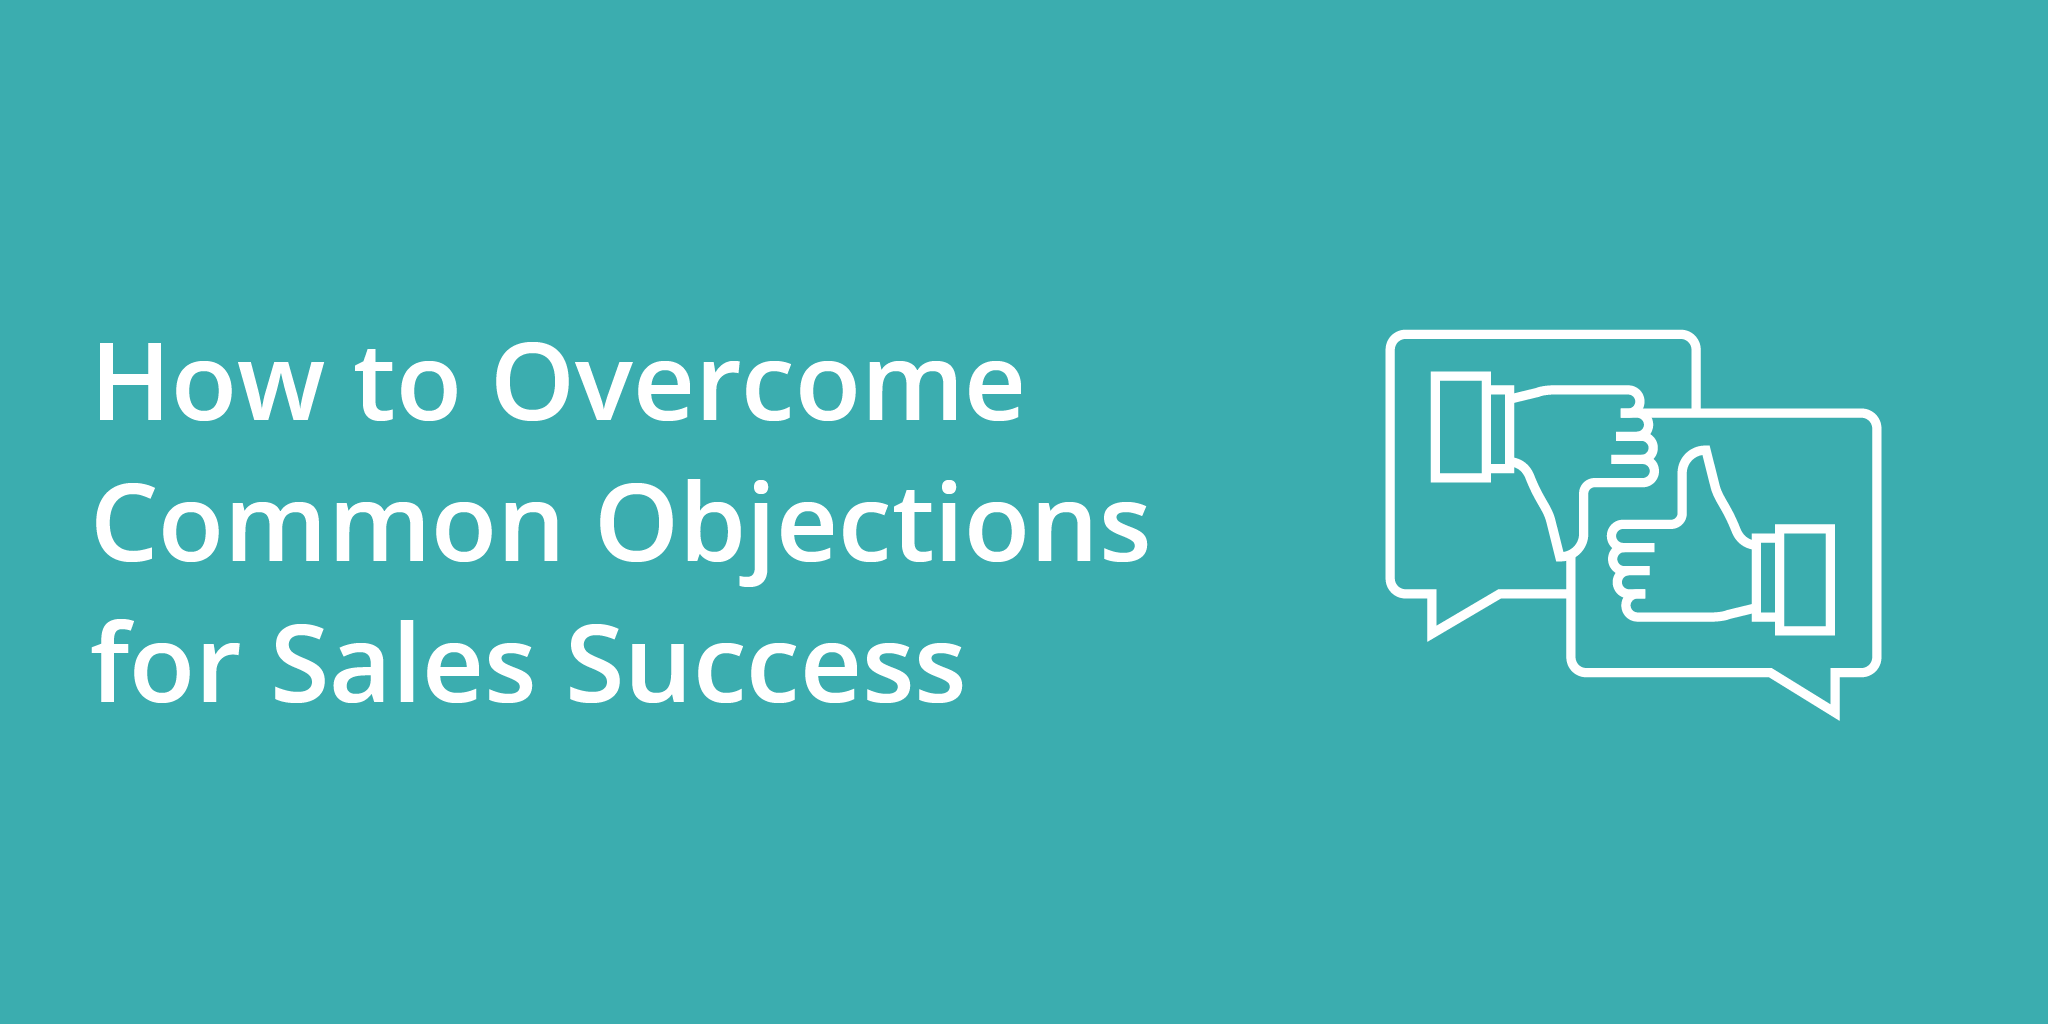 How to Overcome Common Objections for Sales Success | Telephones for business